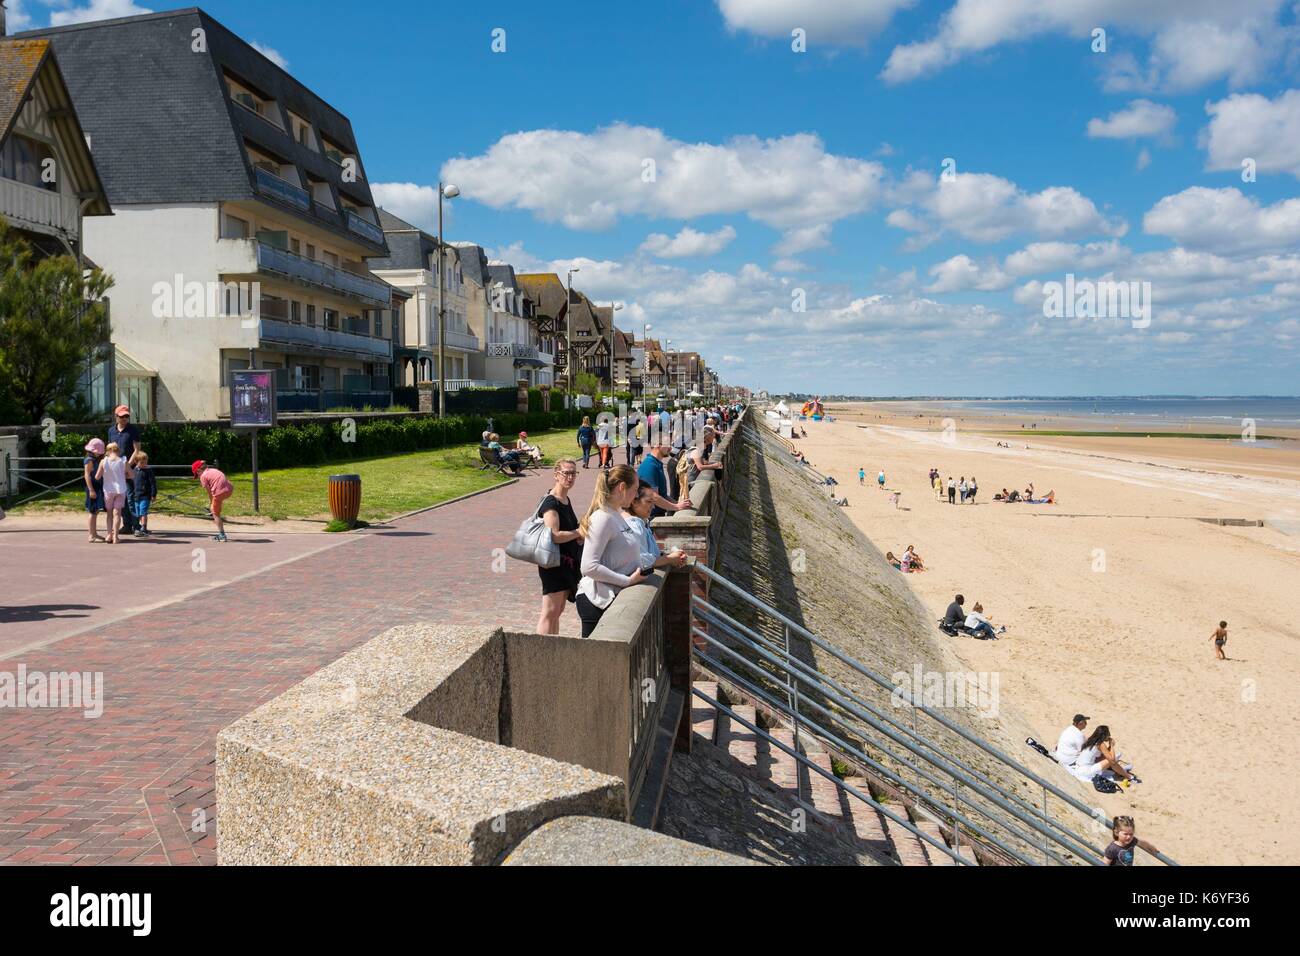 France, Calvados, Pays d'Auge, the cote Fleurie (Flowered coast), Cabourg, the seaside promenade and the Grand Hotel Stock Photo